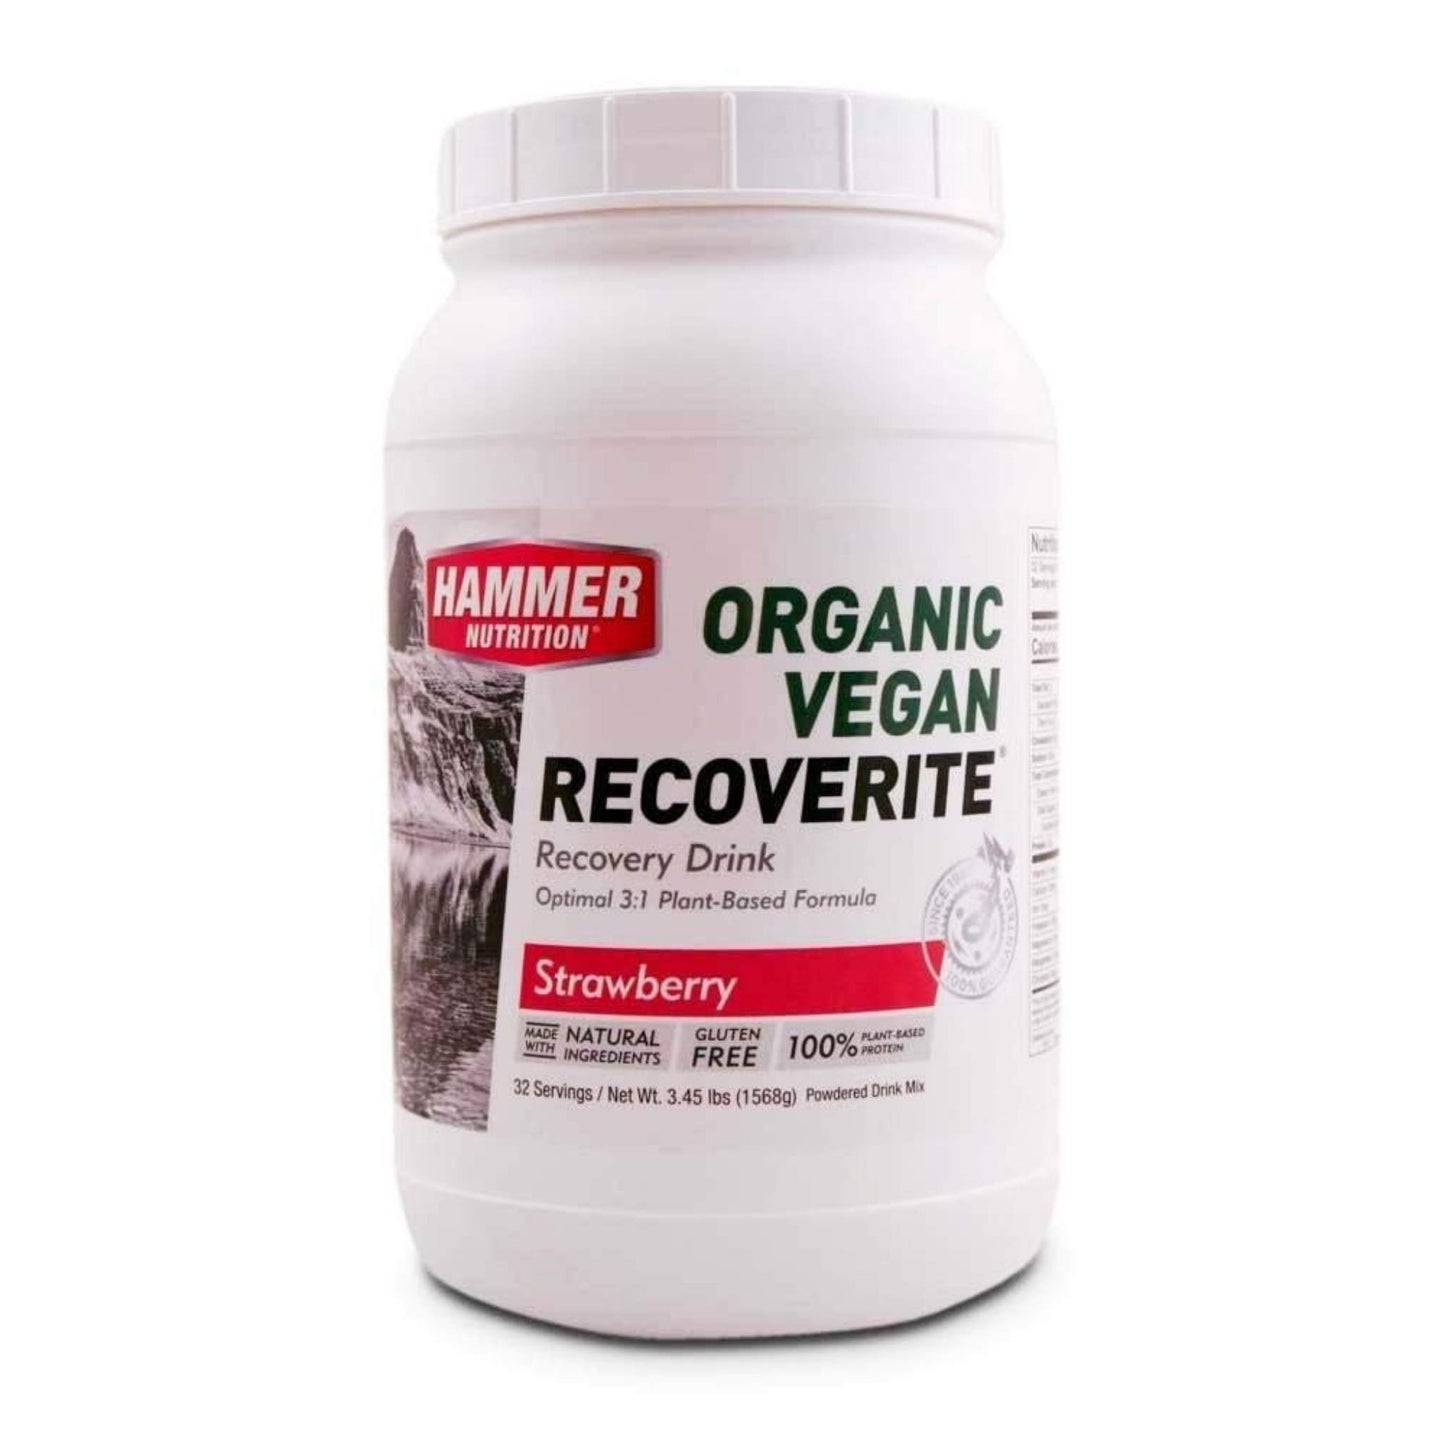 Hammer Nutrition - Vegan Recoverite, Strawberry, 32 Servings, Team Perfect